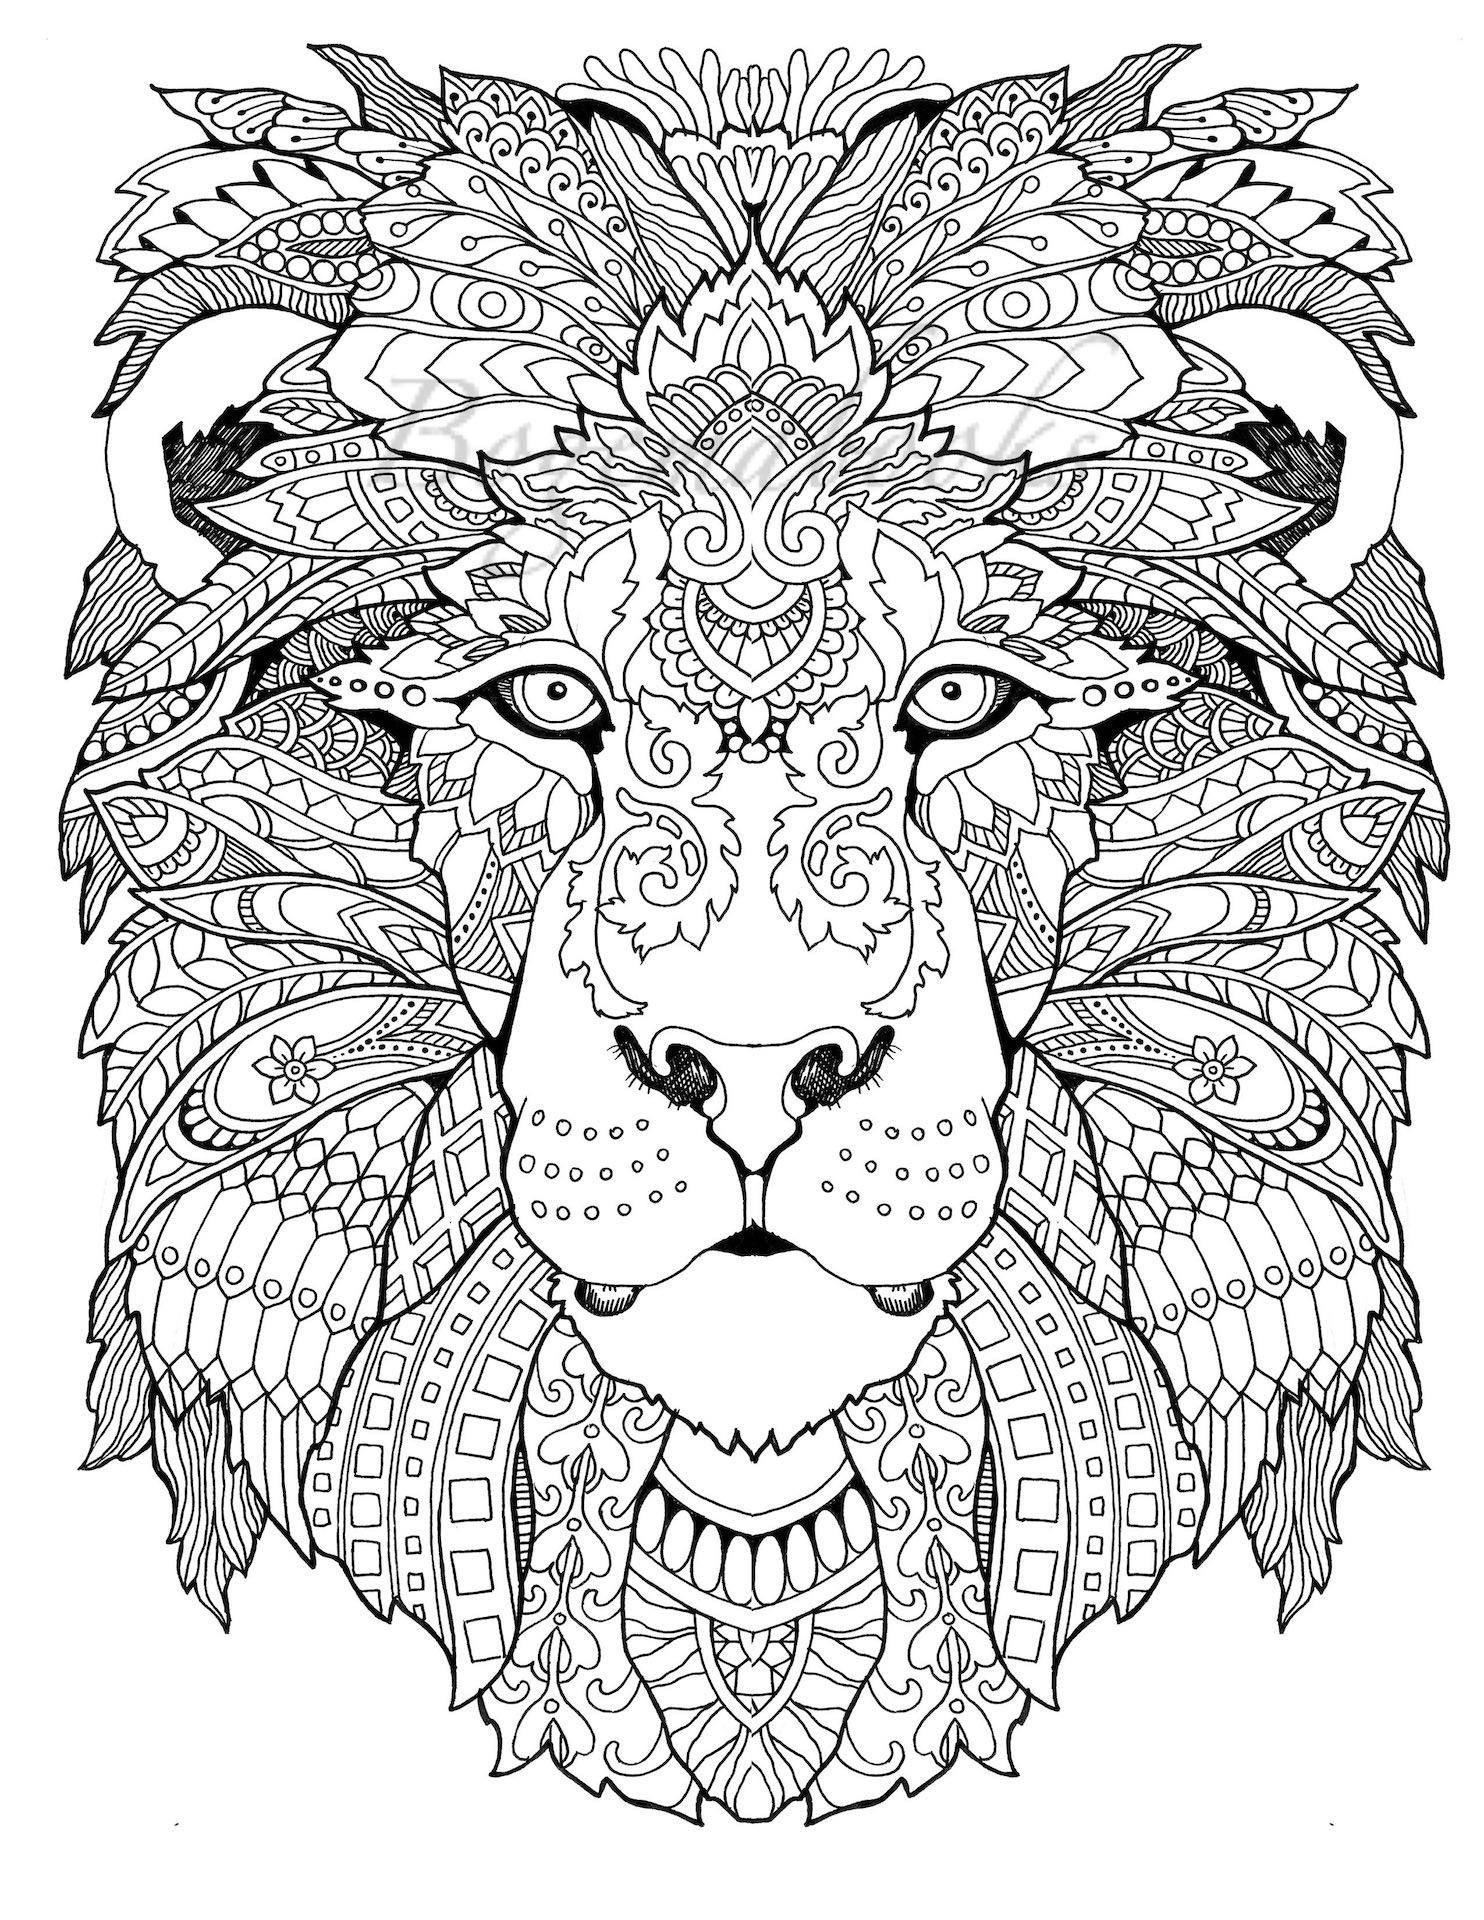 Stress Free Coloring Pages For Boys
 Awesome Animals Adult Coloring Book Coloring pages PDF